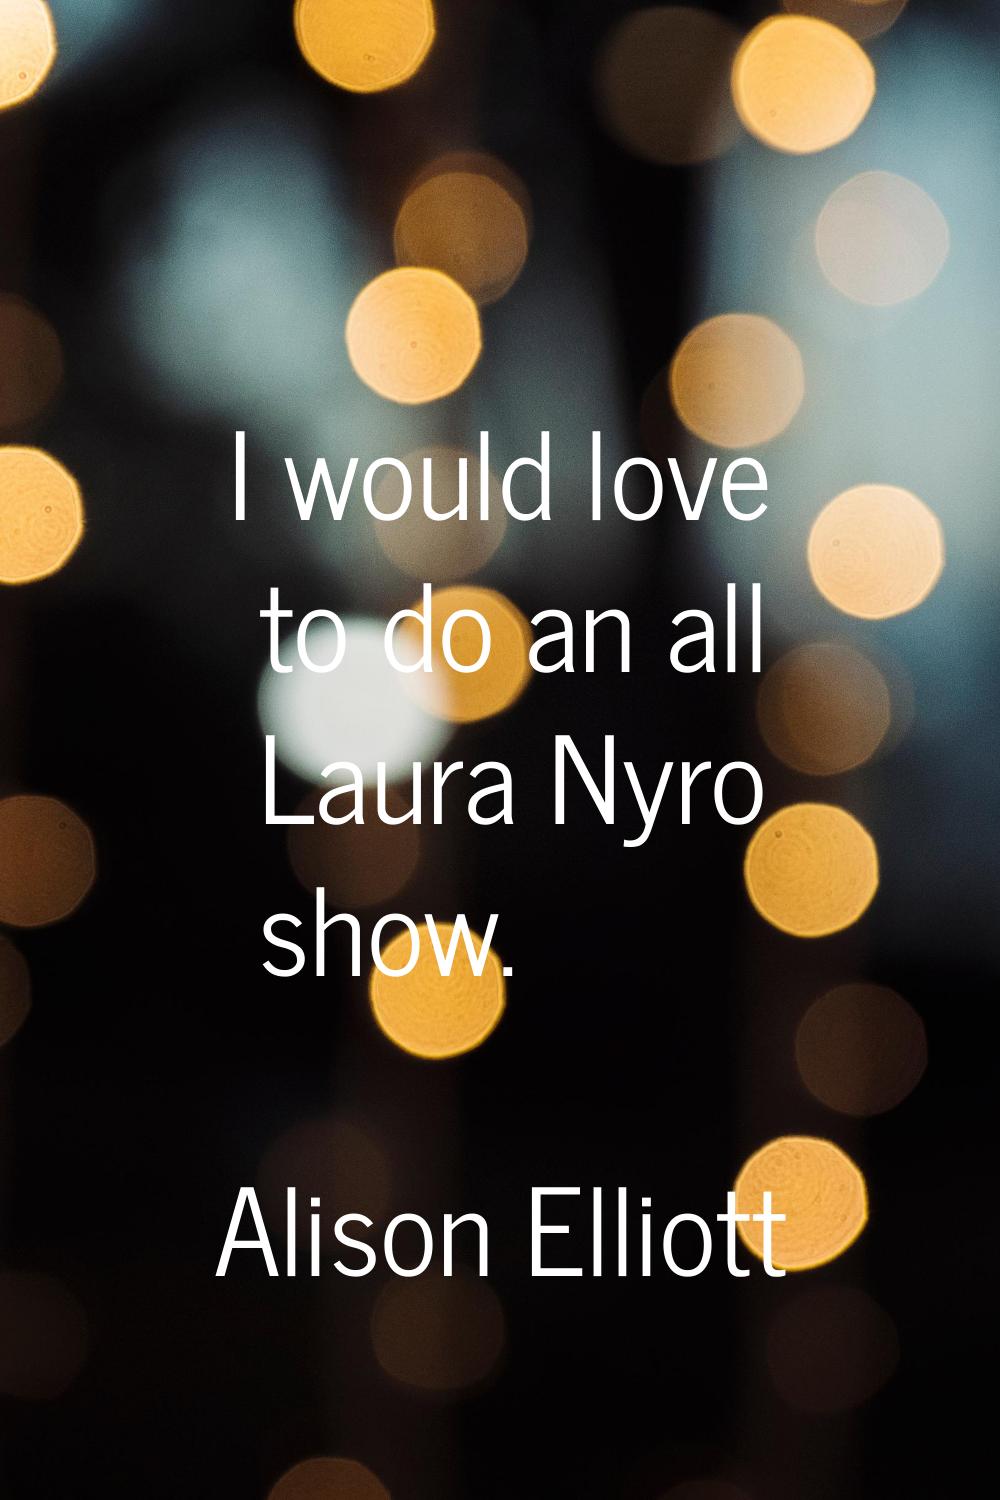 I would love to do an all Laura Nyro show.